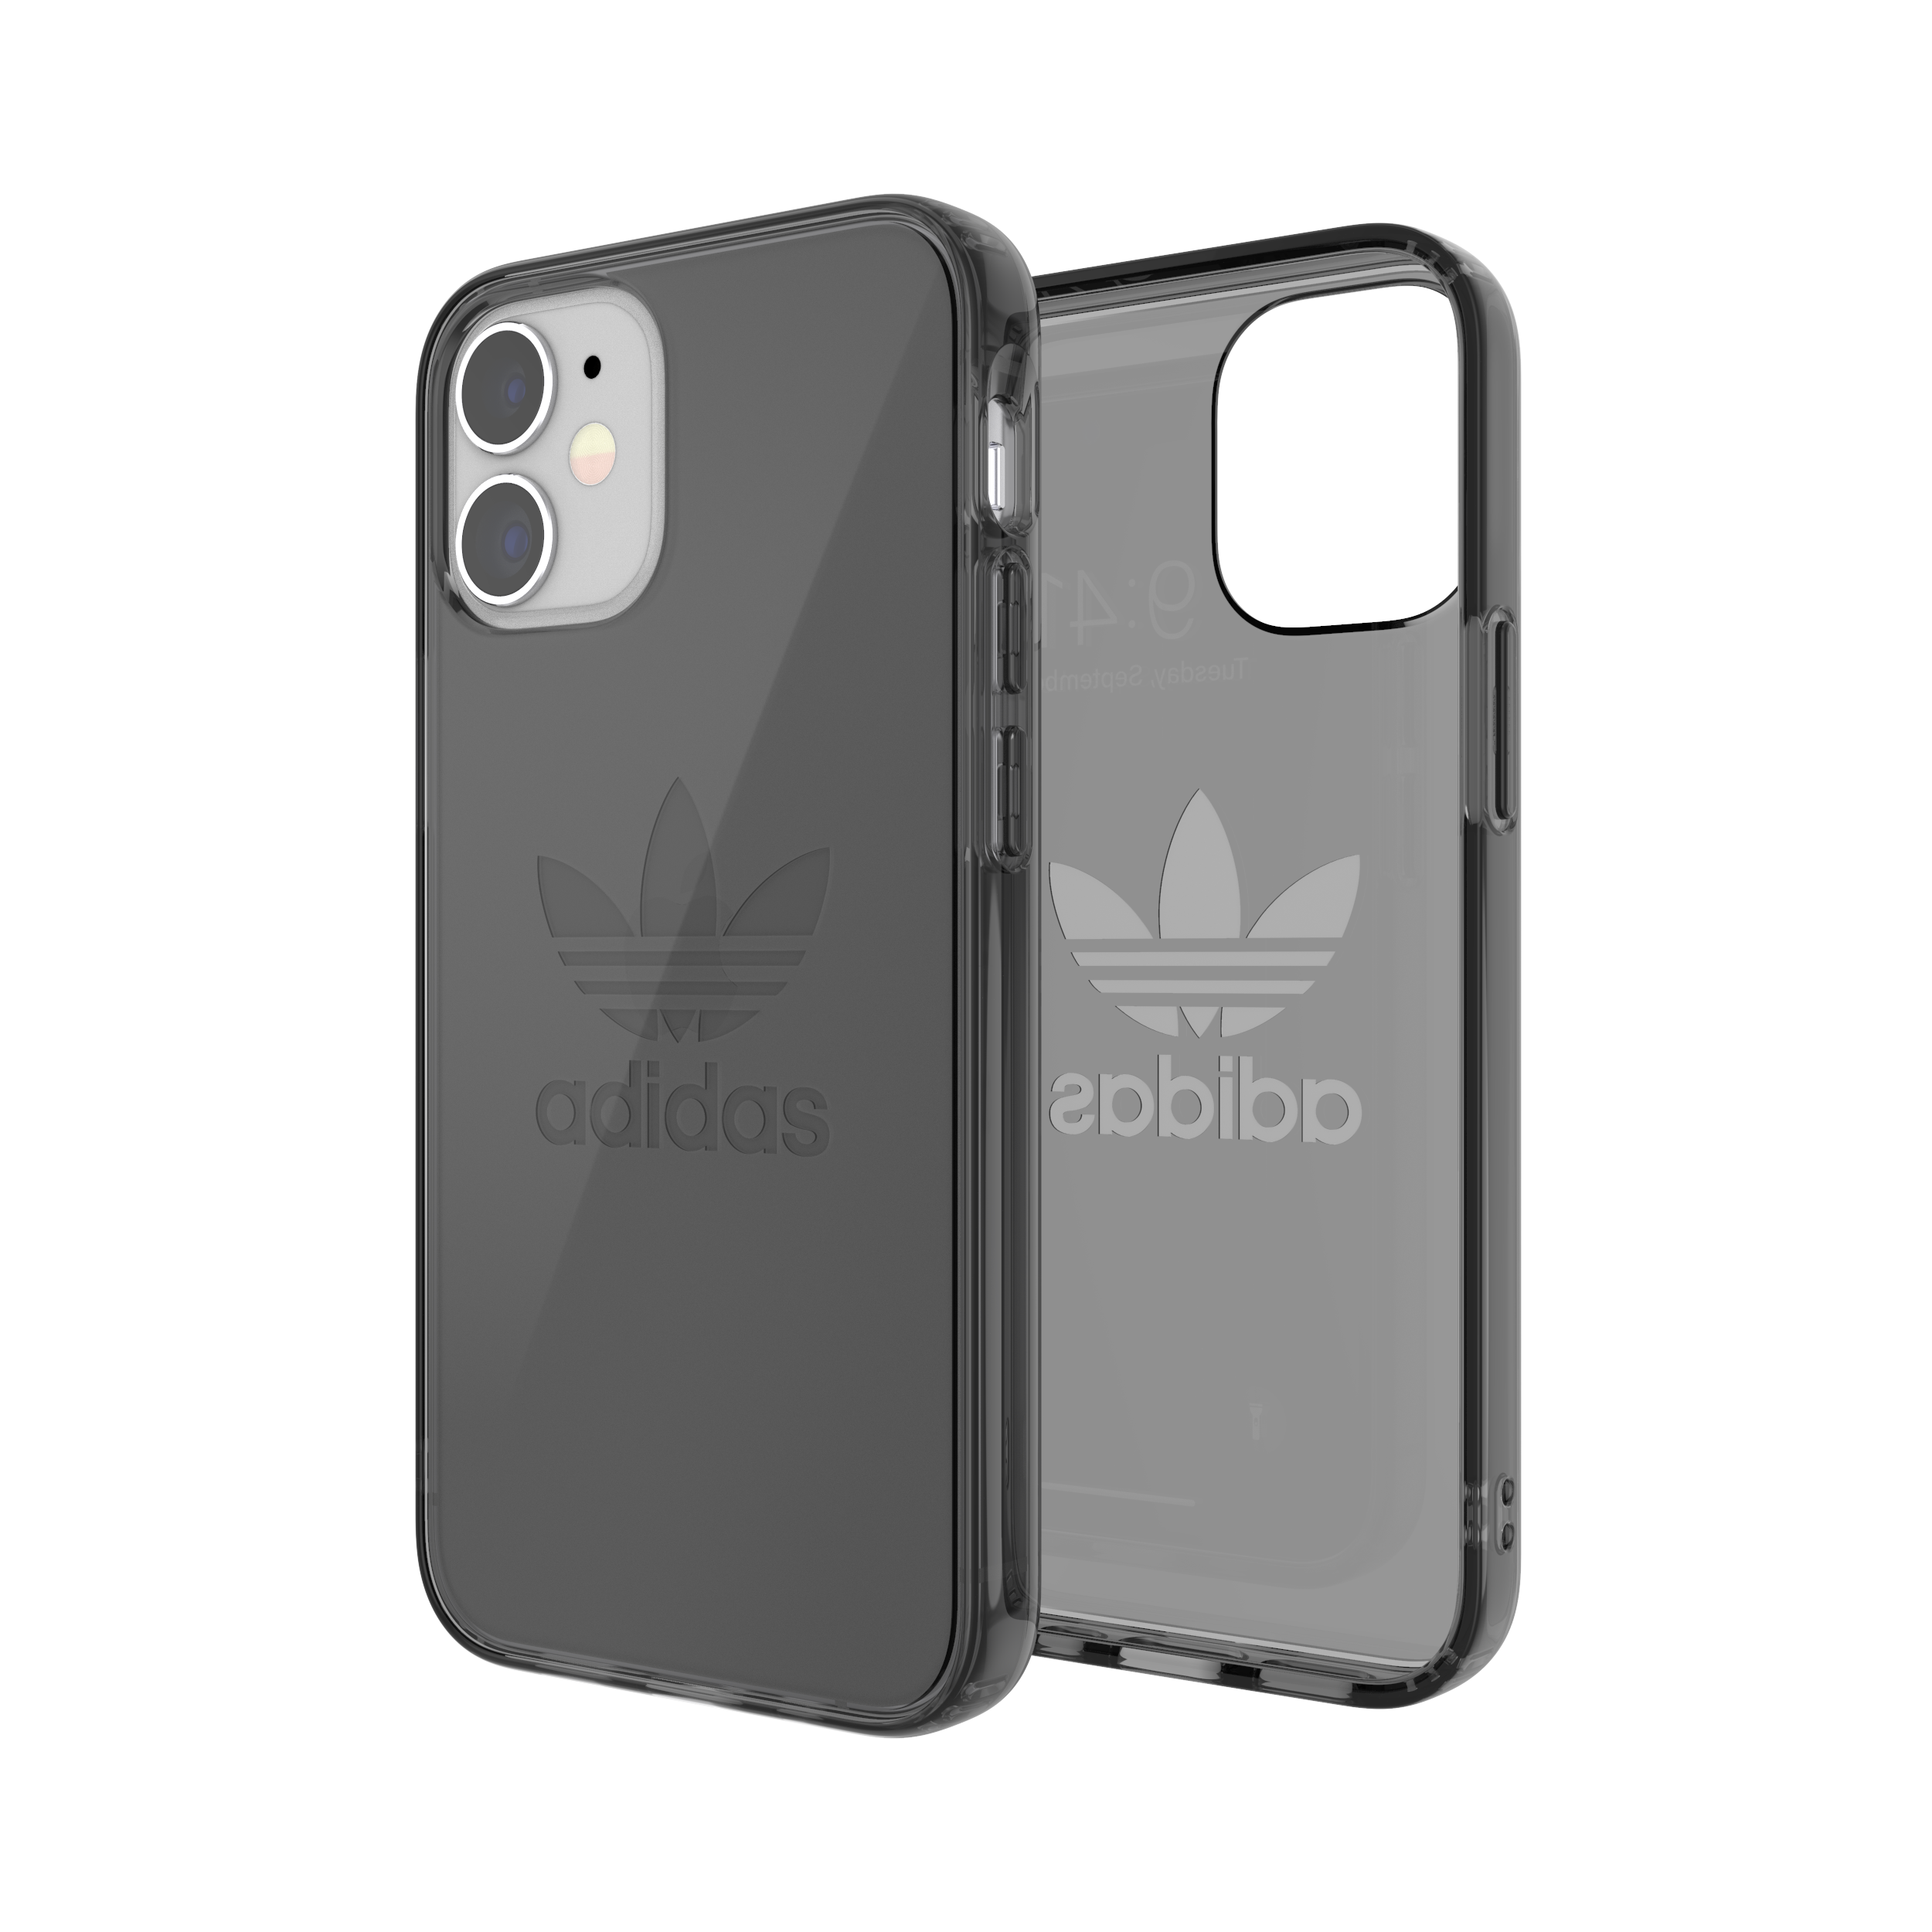 adidas ORIGINALS Apple iPhone 12 Mini Protective Clear Case - Back cover w/ Trefoil Design, Scratch & Drop Protection w/ TPU Bumper & Air Cushion, Wireless Charging Compatible - Black